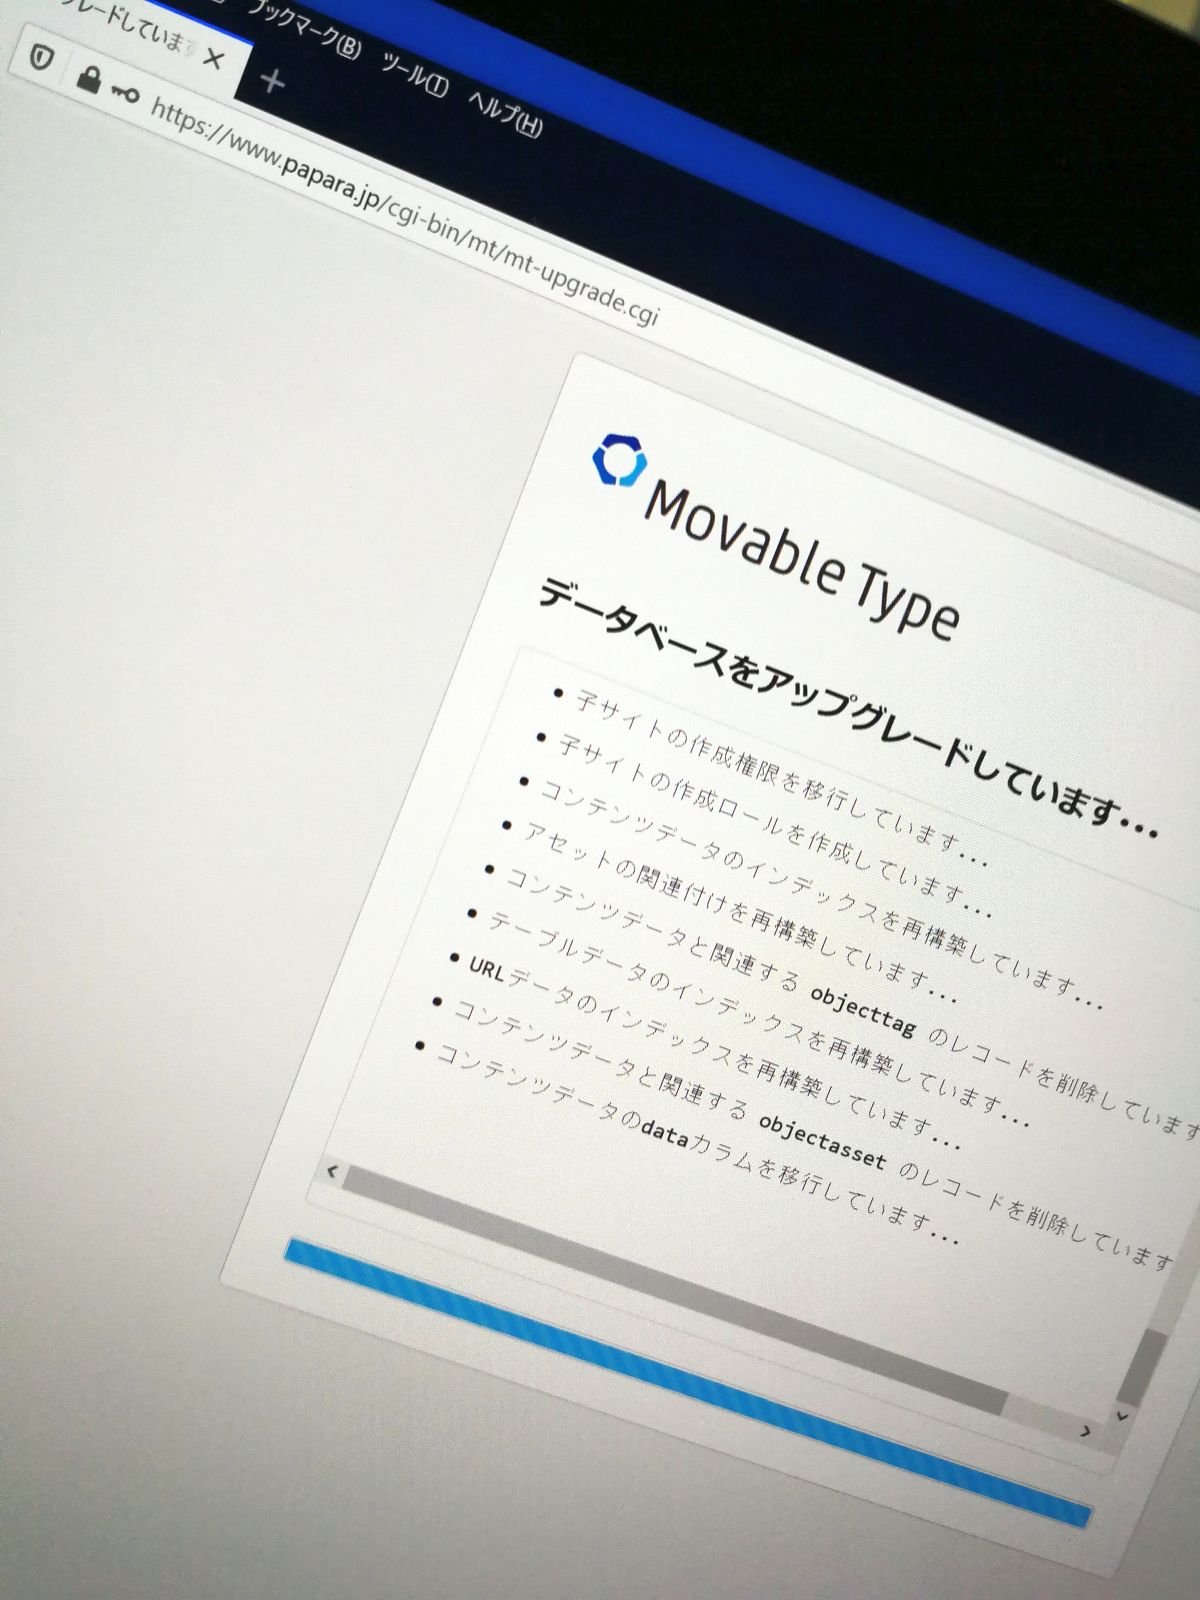 MovableTypeのアップグレード